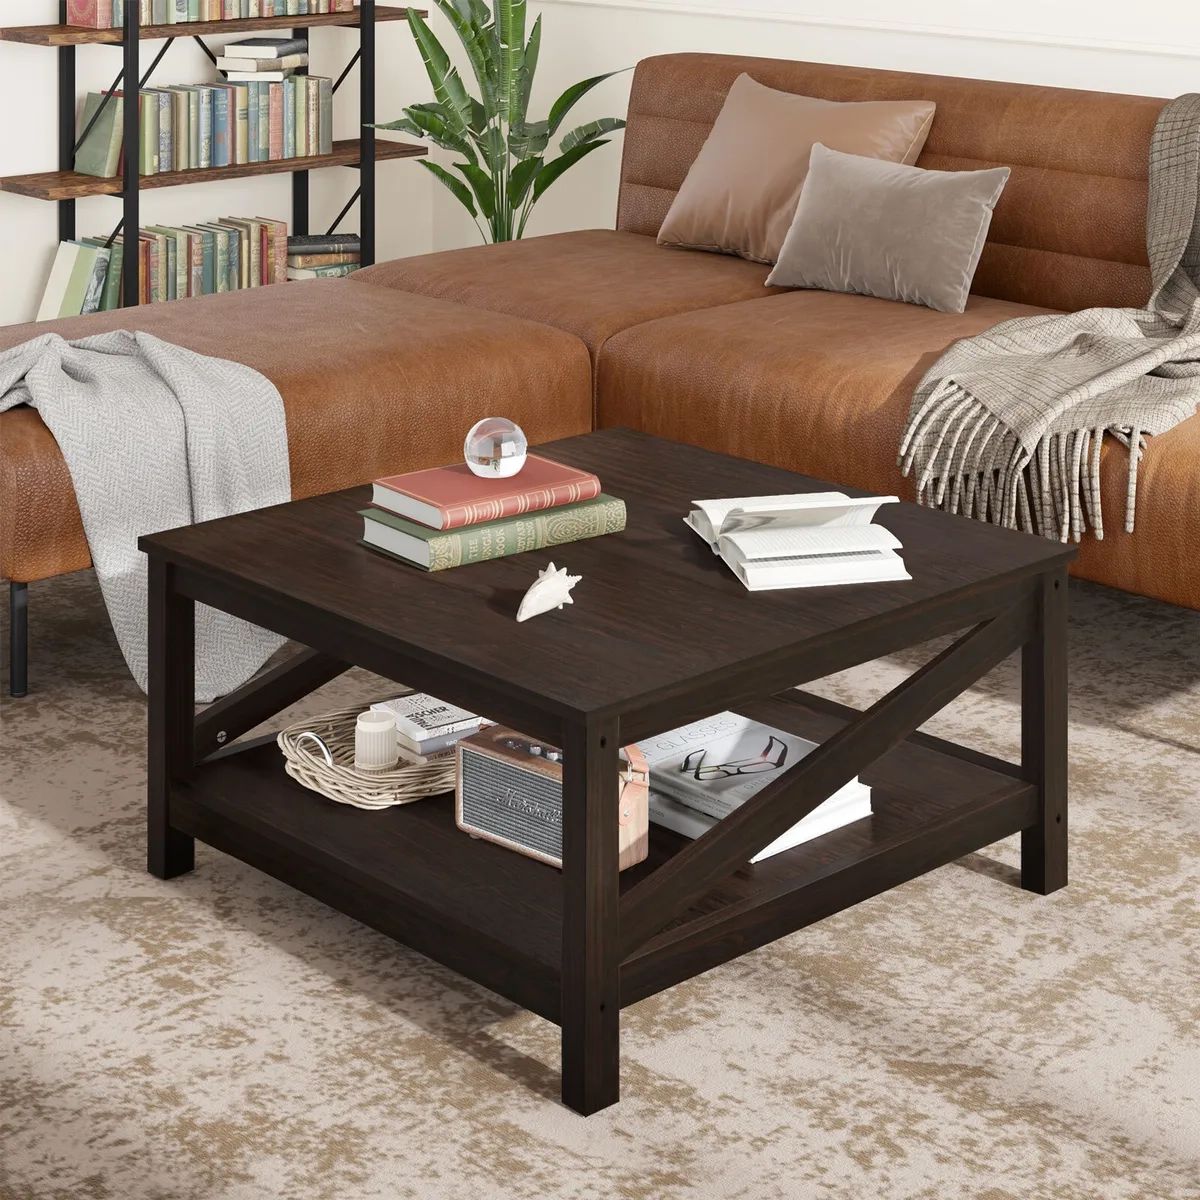 2 Tier Wood Square Coffee Table Farmhouse Cocktail Table With Storage  Shelves | Ebay With Wood Coffee Tables With 2 Tier Storage (View 13 of 15)